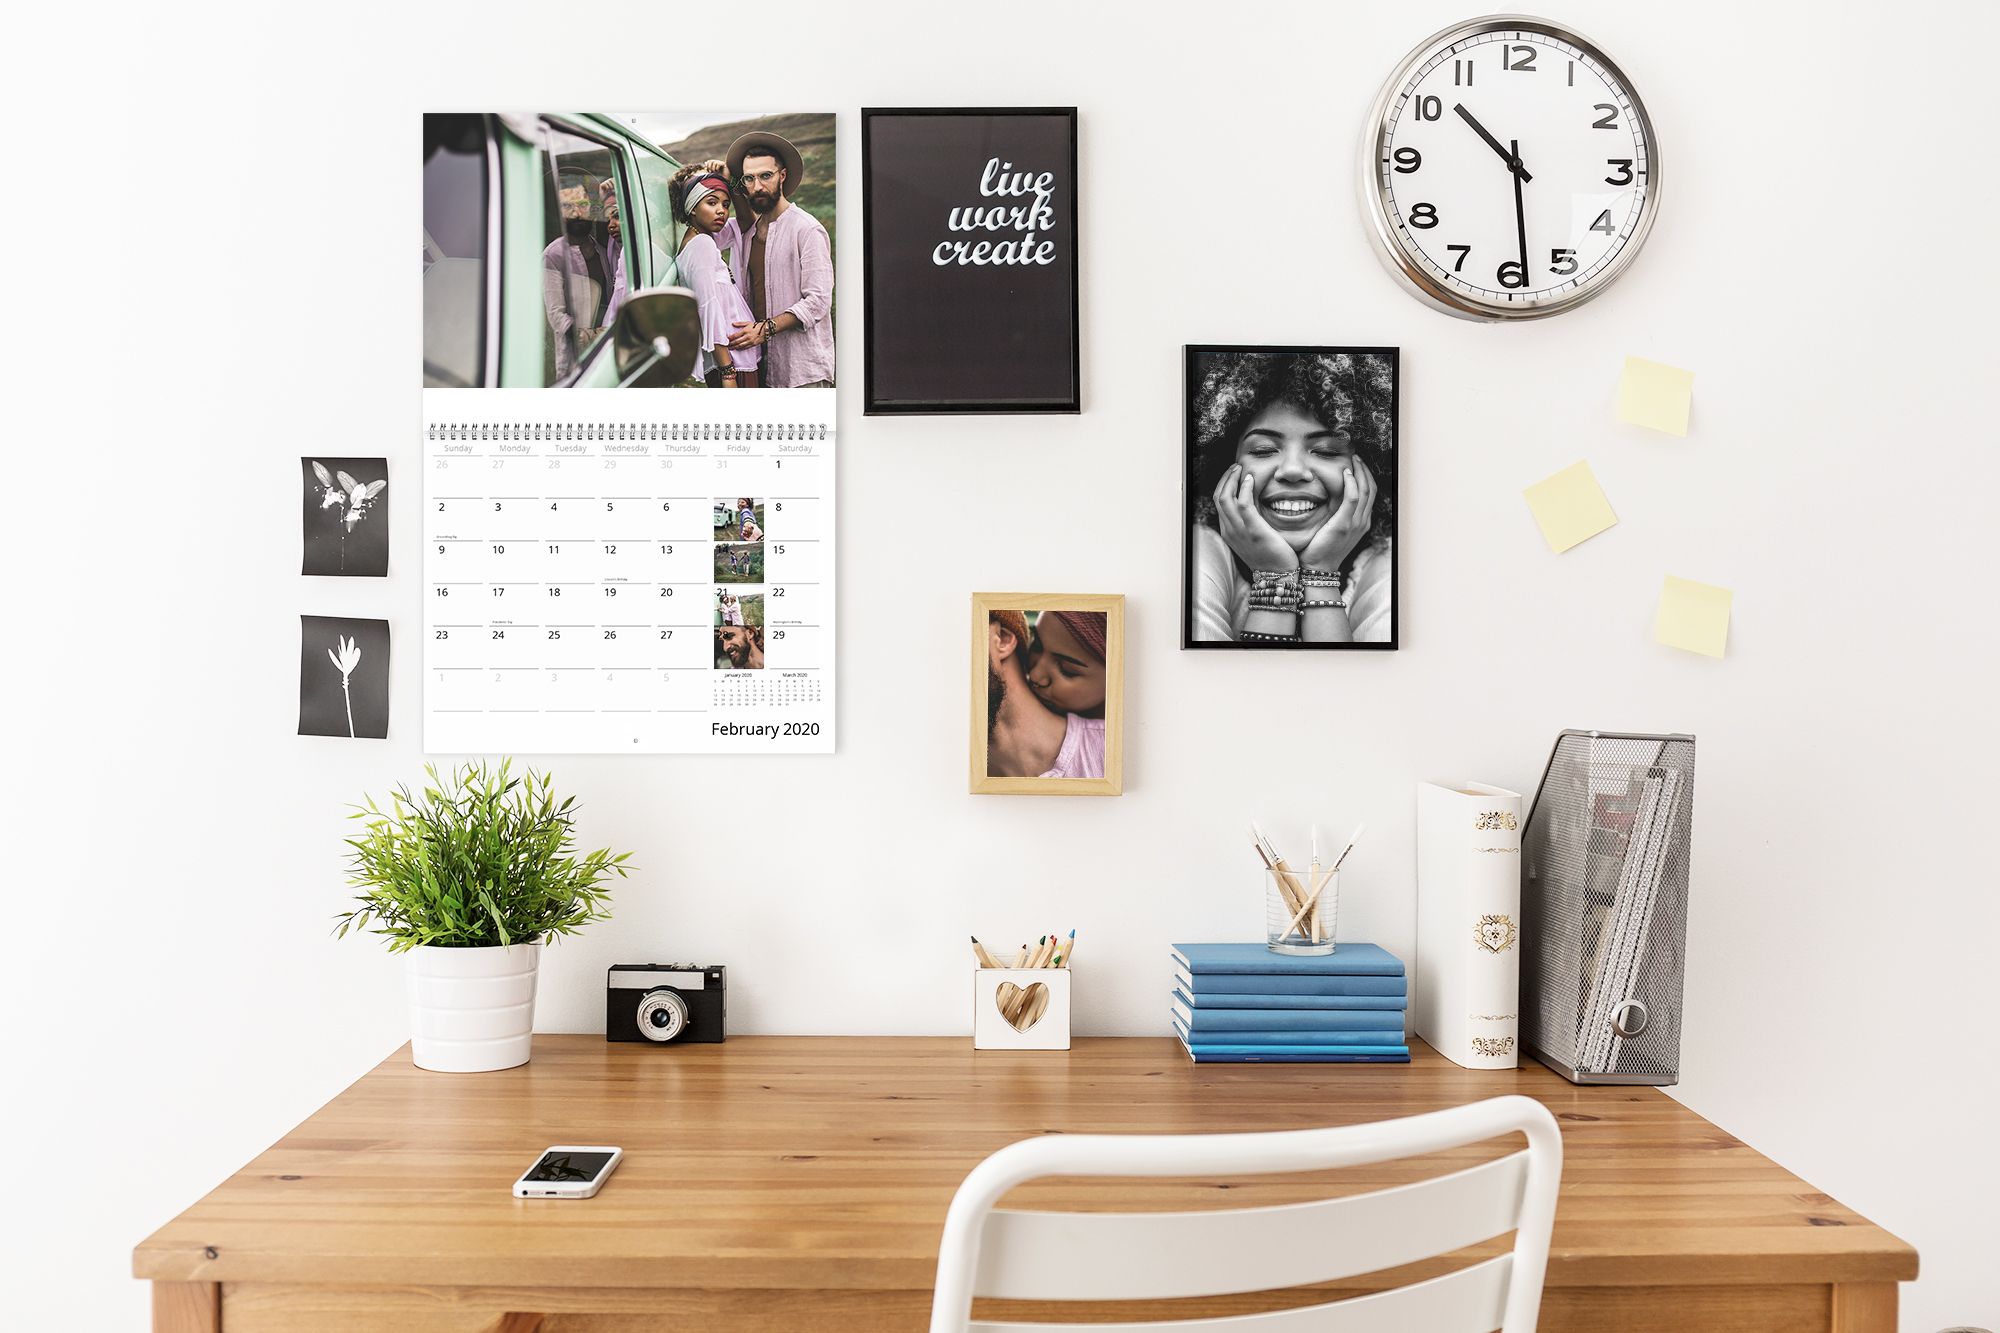 Say "I love you" every week with a photo calendar as a gift